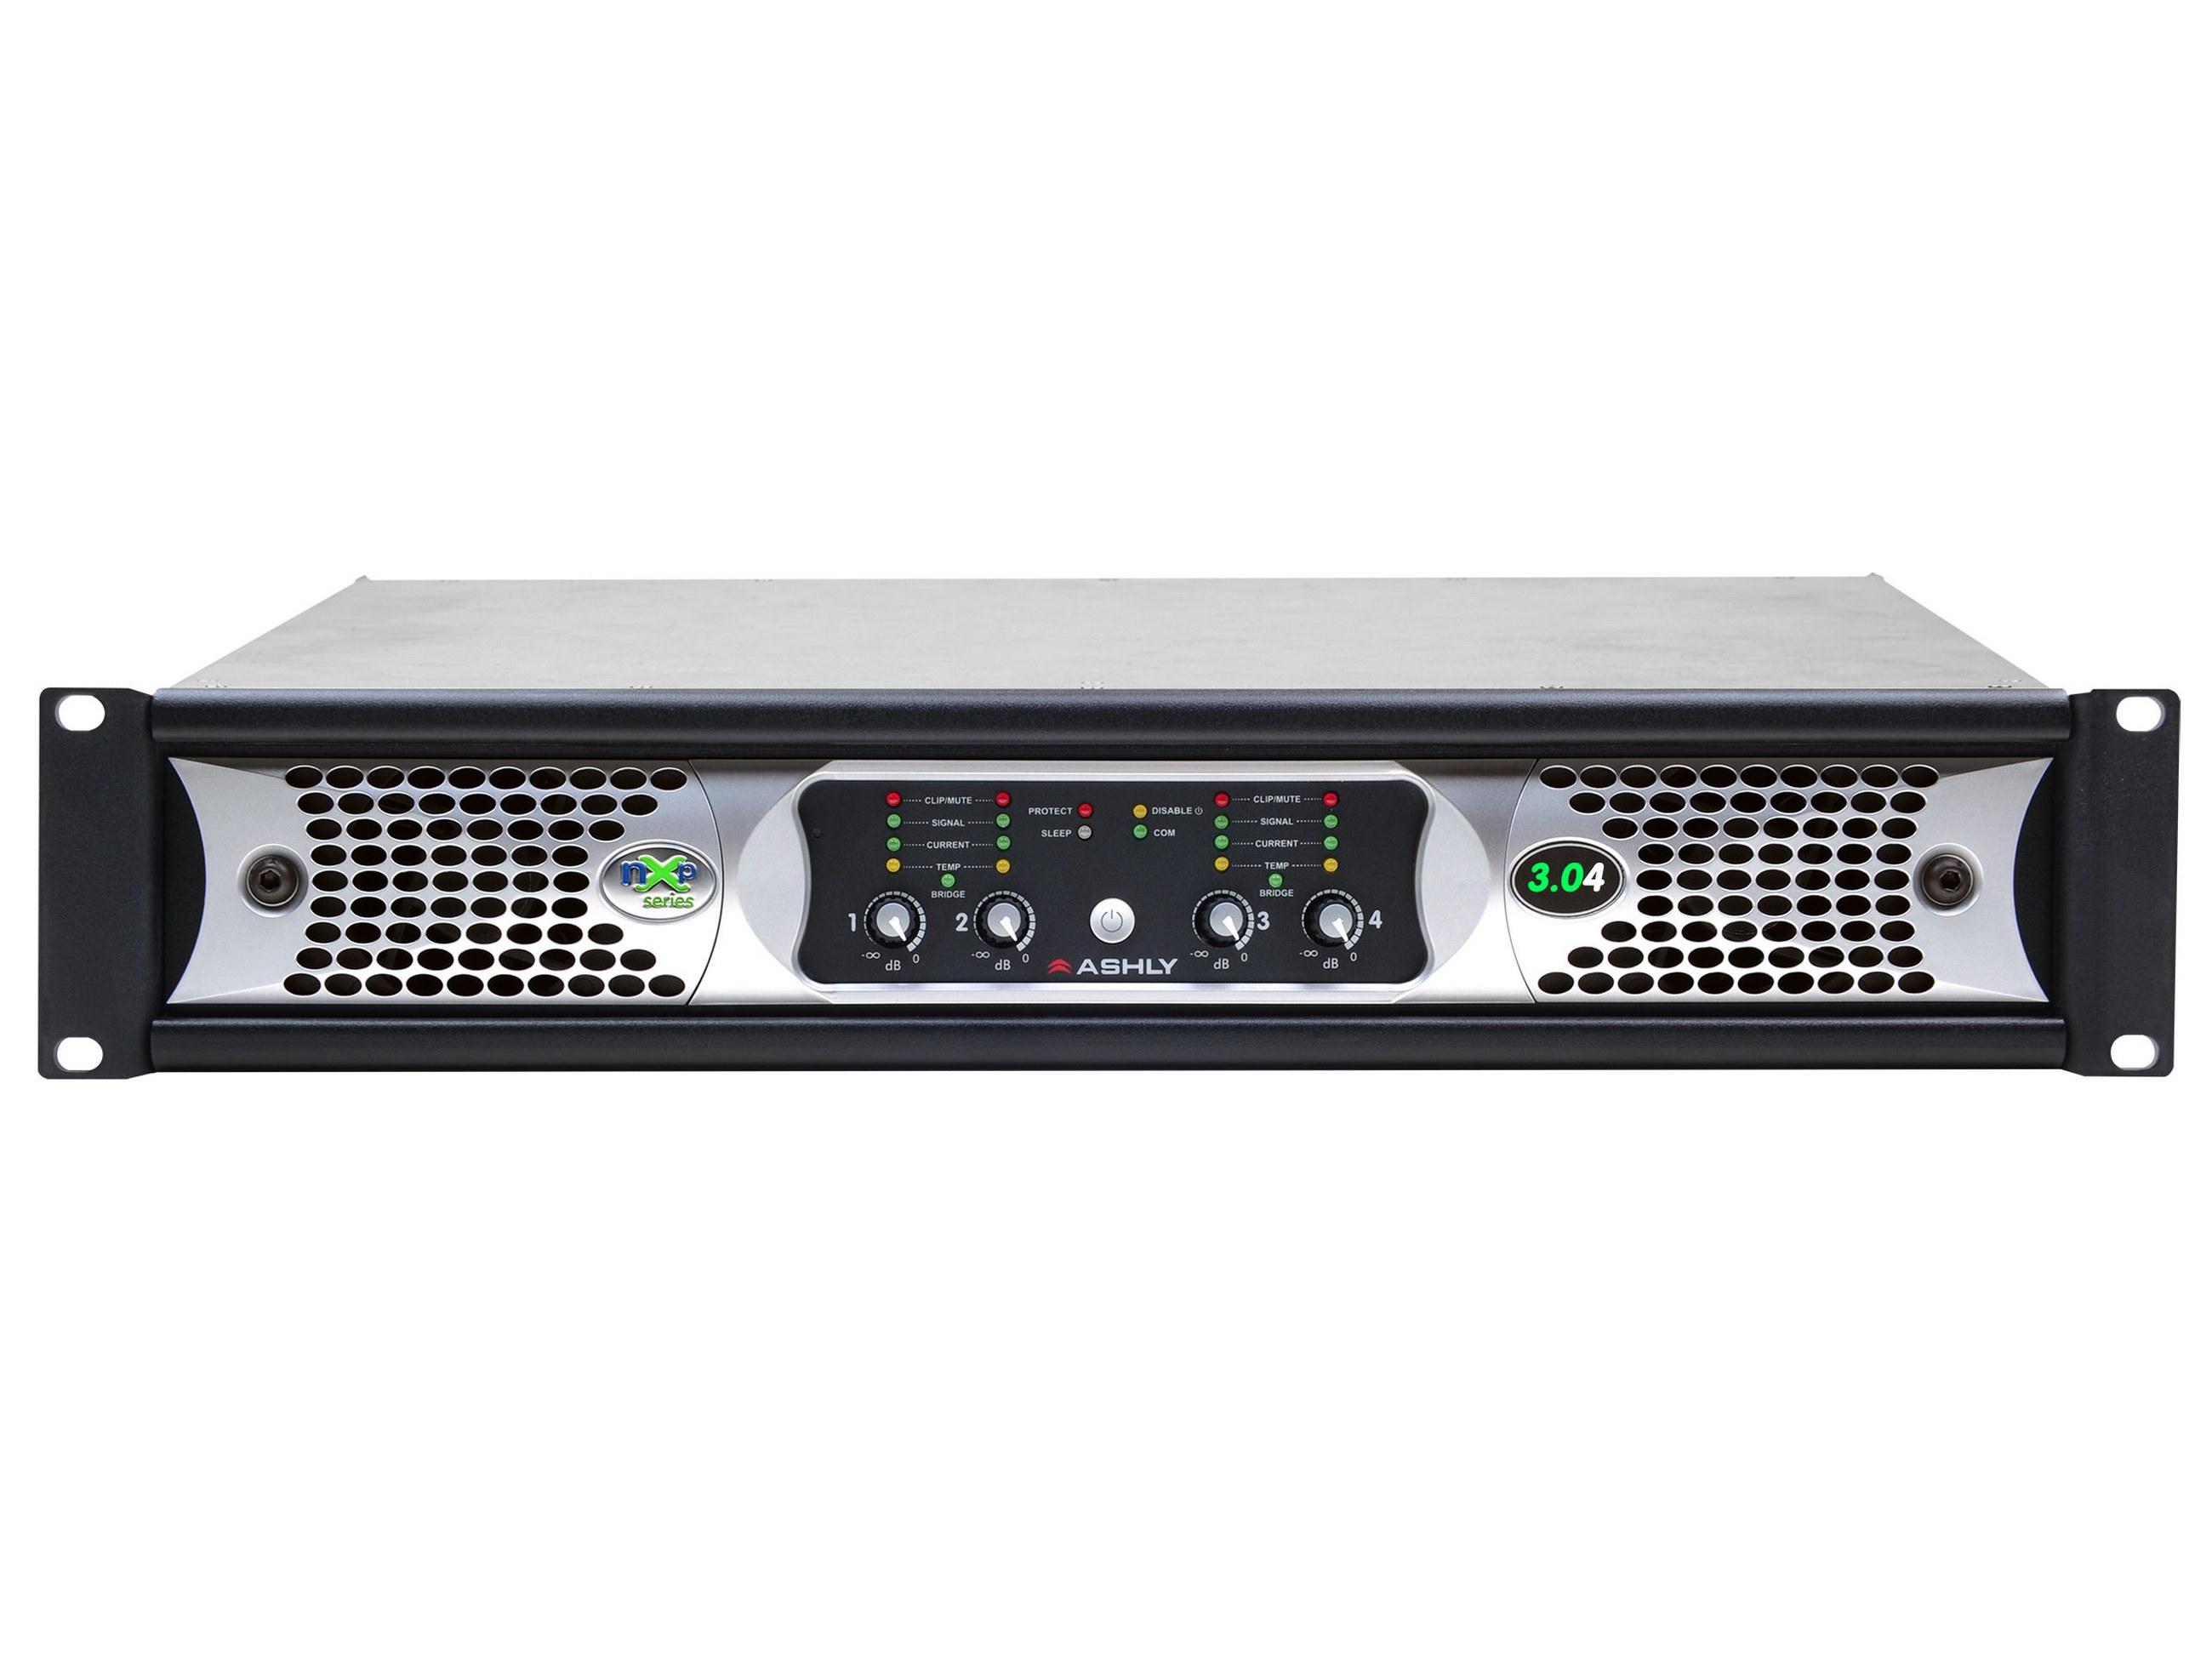 nXp3.04 Network Power Amplifier 4 x 3000 Watts/2 Ohms with Protea DSP by Ashly